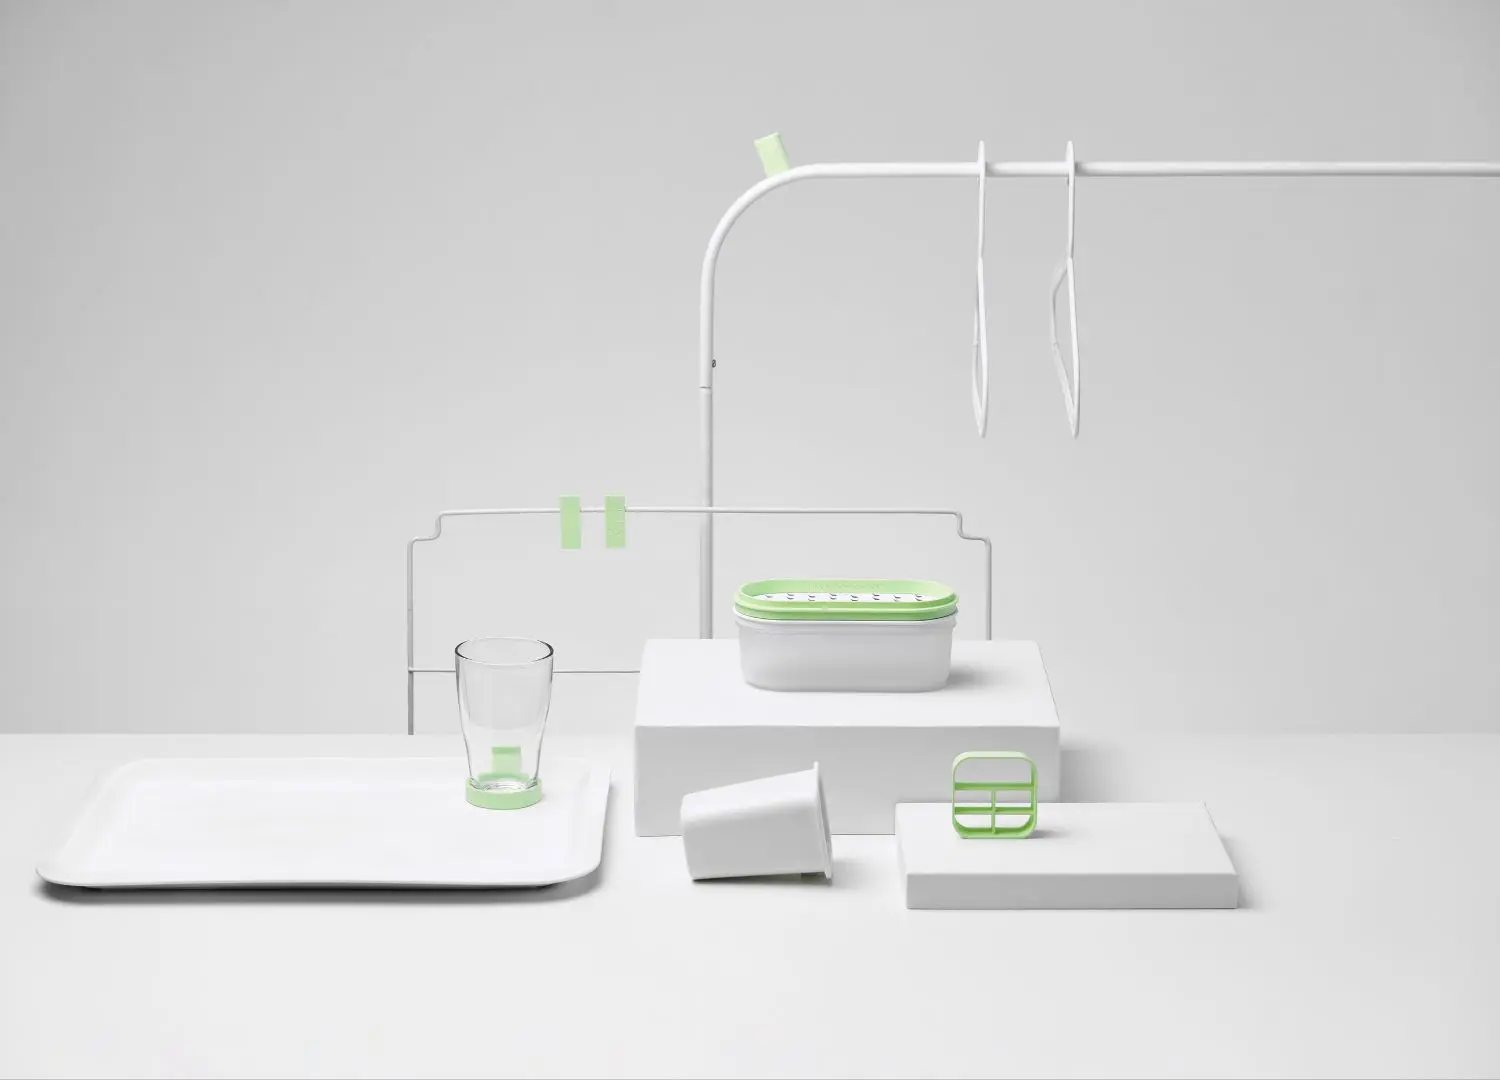 Uppgradera Collection 3 by Adam Miklosi x Enable 3D _ IKEA hacks _ 3D printing